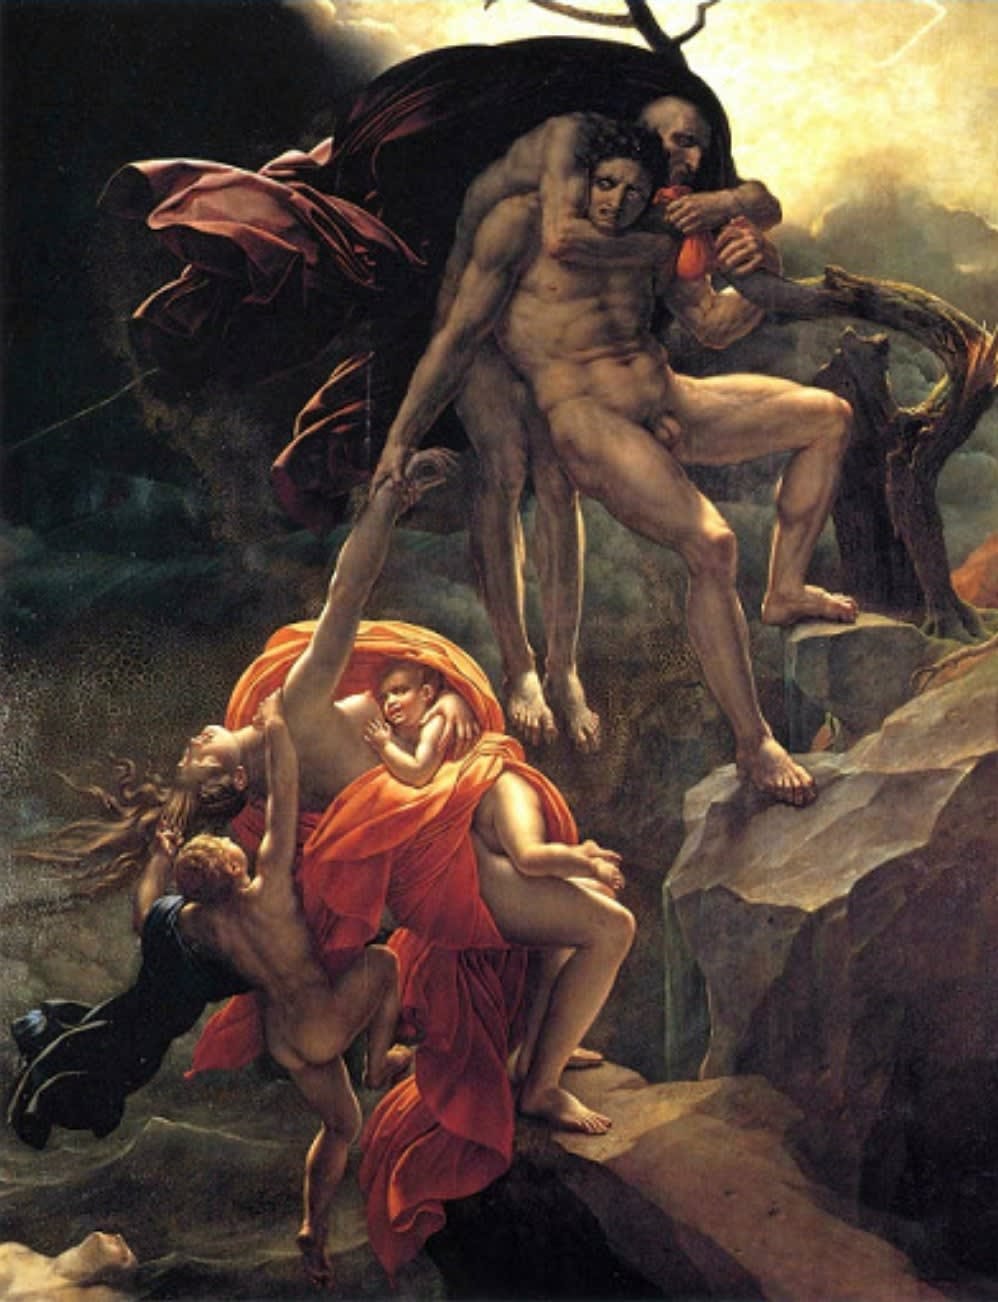 “Scene of the Flood”, painting by Anne-Louis Girodet